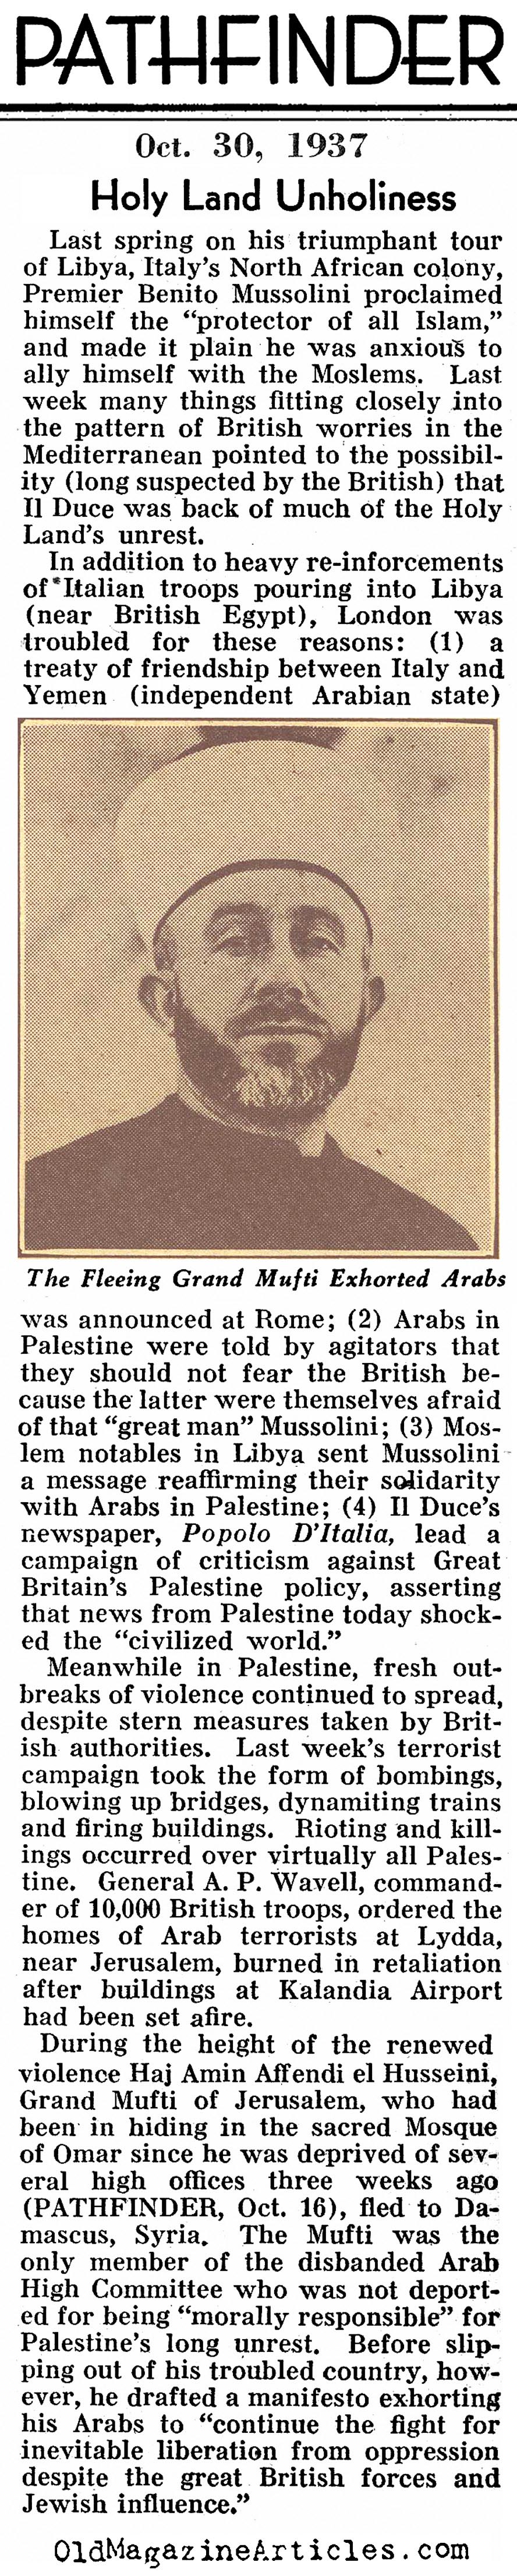 Unholiness in the Holy Land (Pathfinder Magazine, 1937)